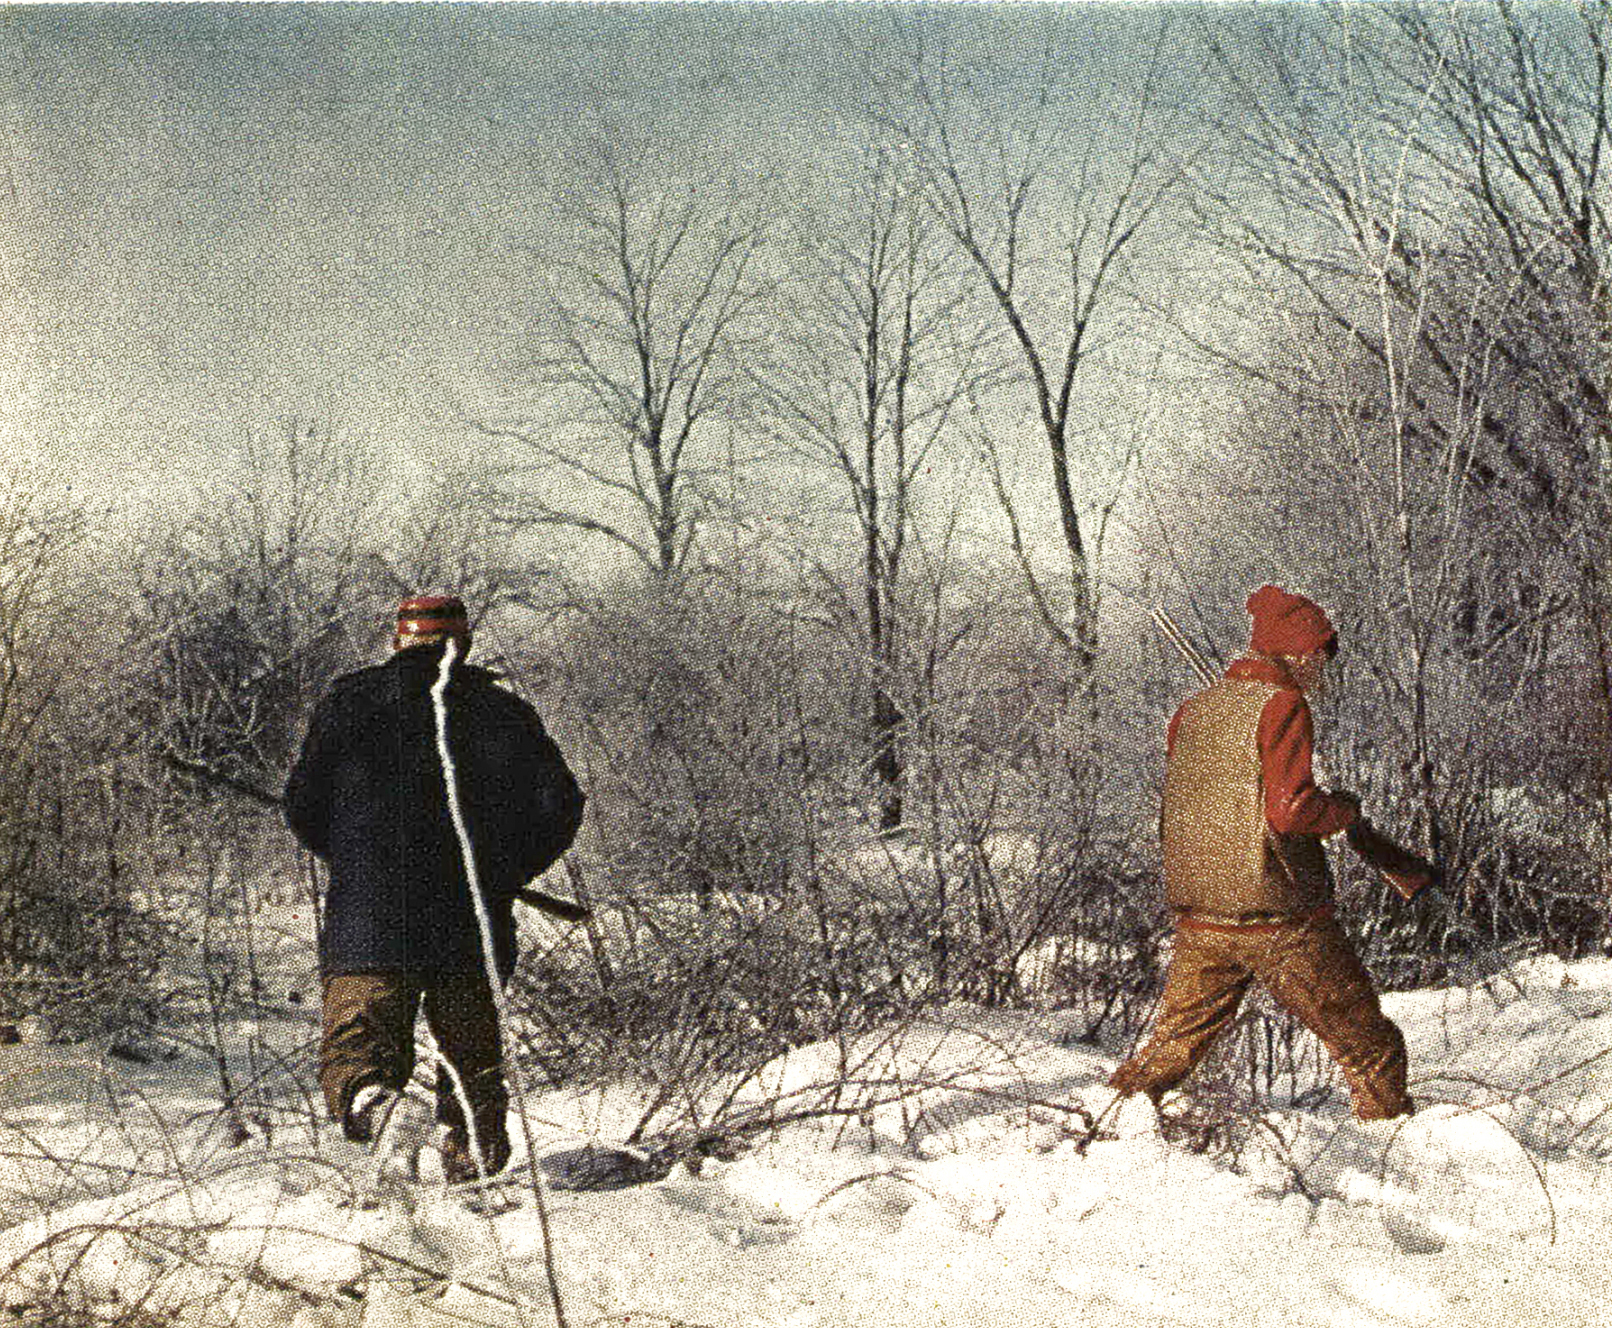 A pair of rabbit hunters busting brush for bunnies.